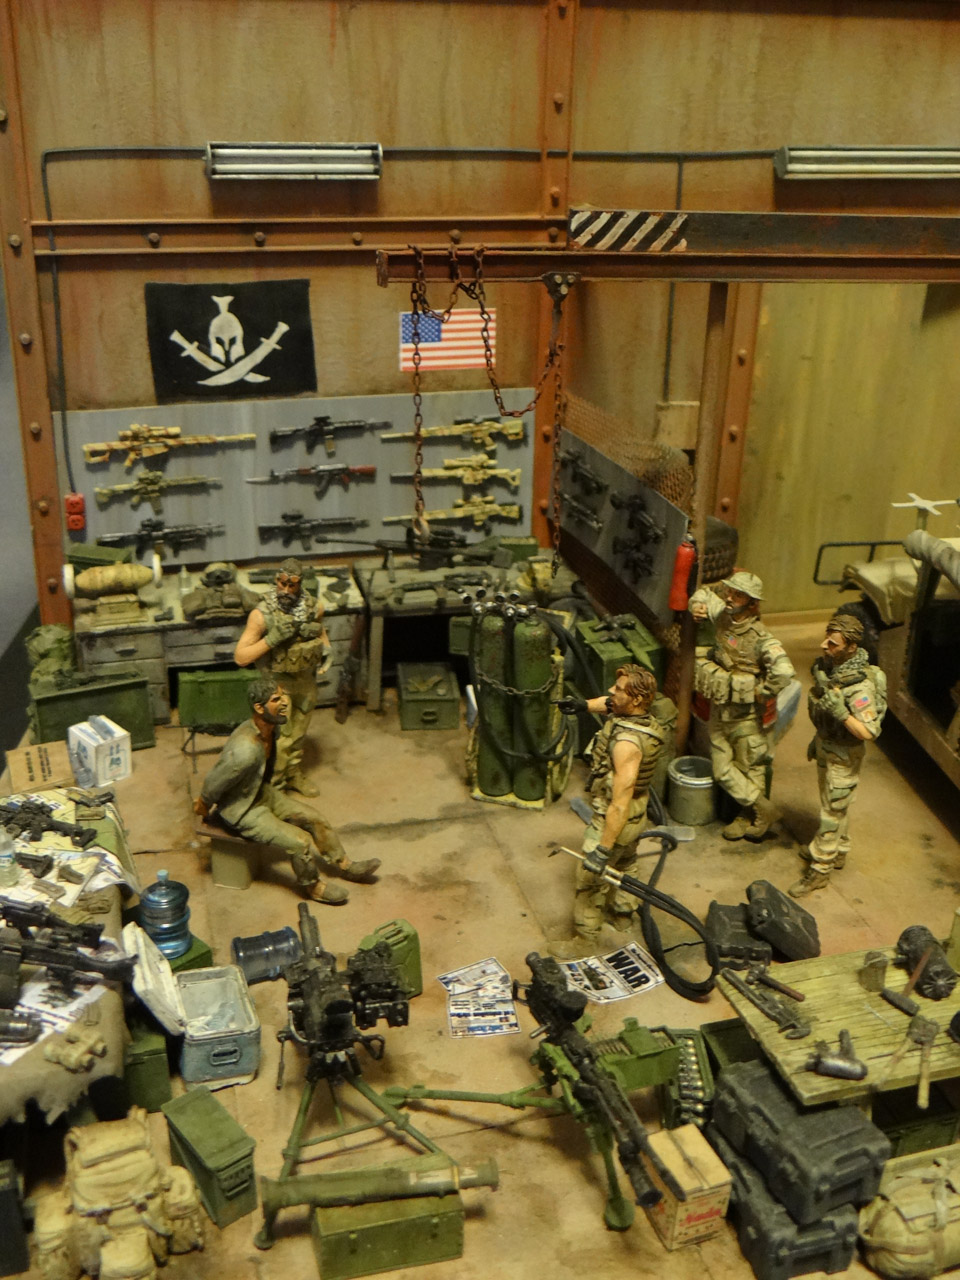 Dioramas and Vignettes: Enforcement to democracy, photo #4